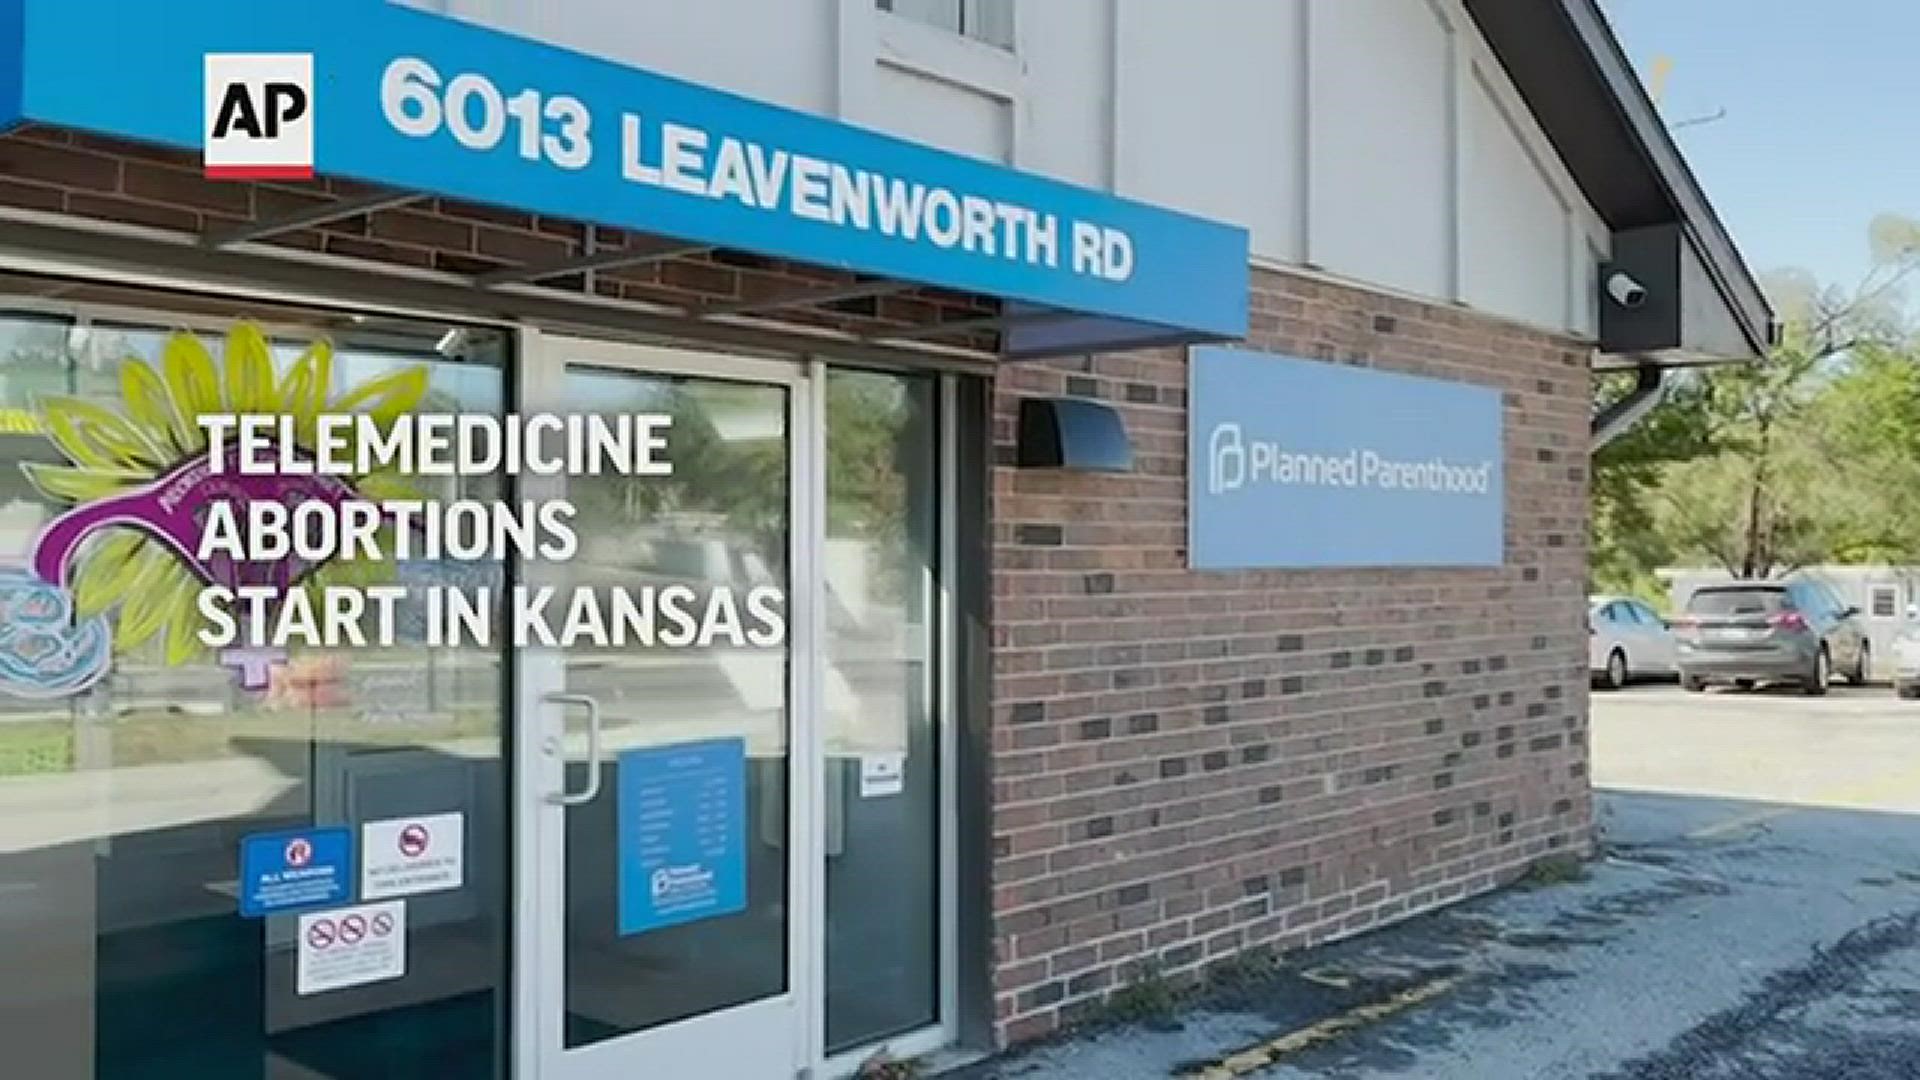 A Planned Parenthood affiliate says it has started teleconferences with off-site doctors for patients seeking medication abortions at one of its Kansas clinics.